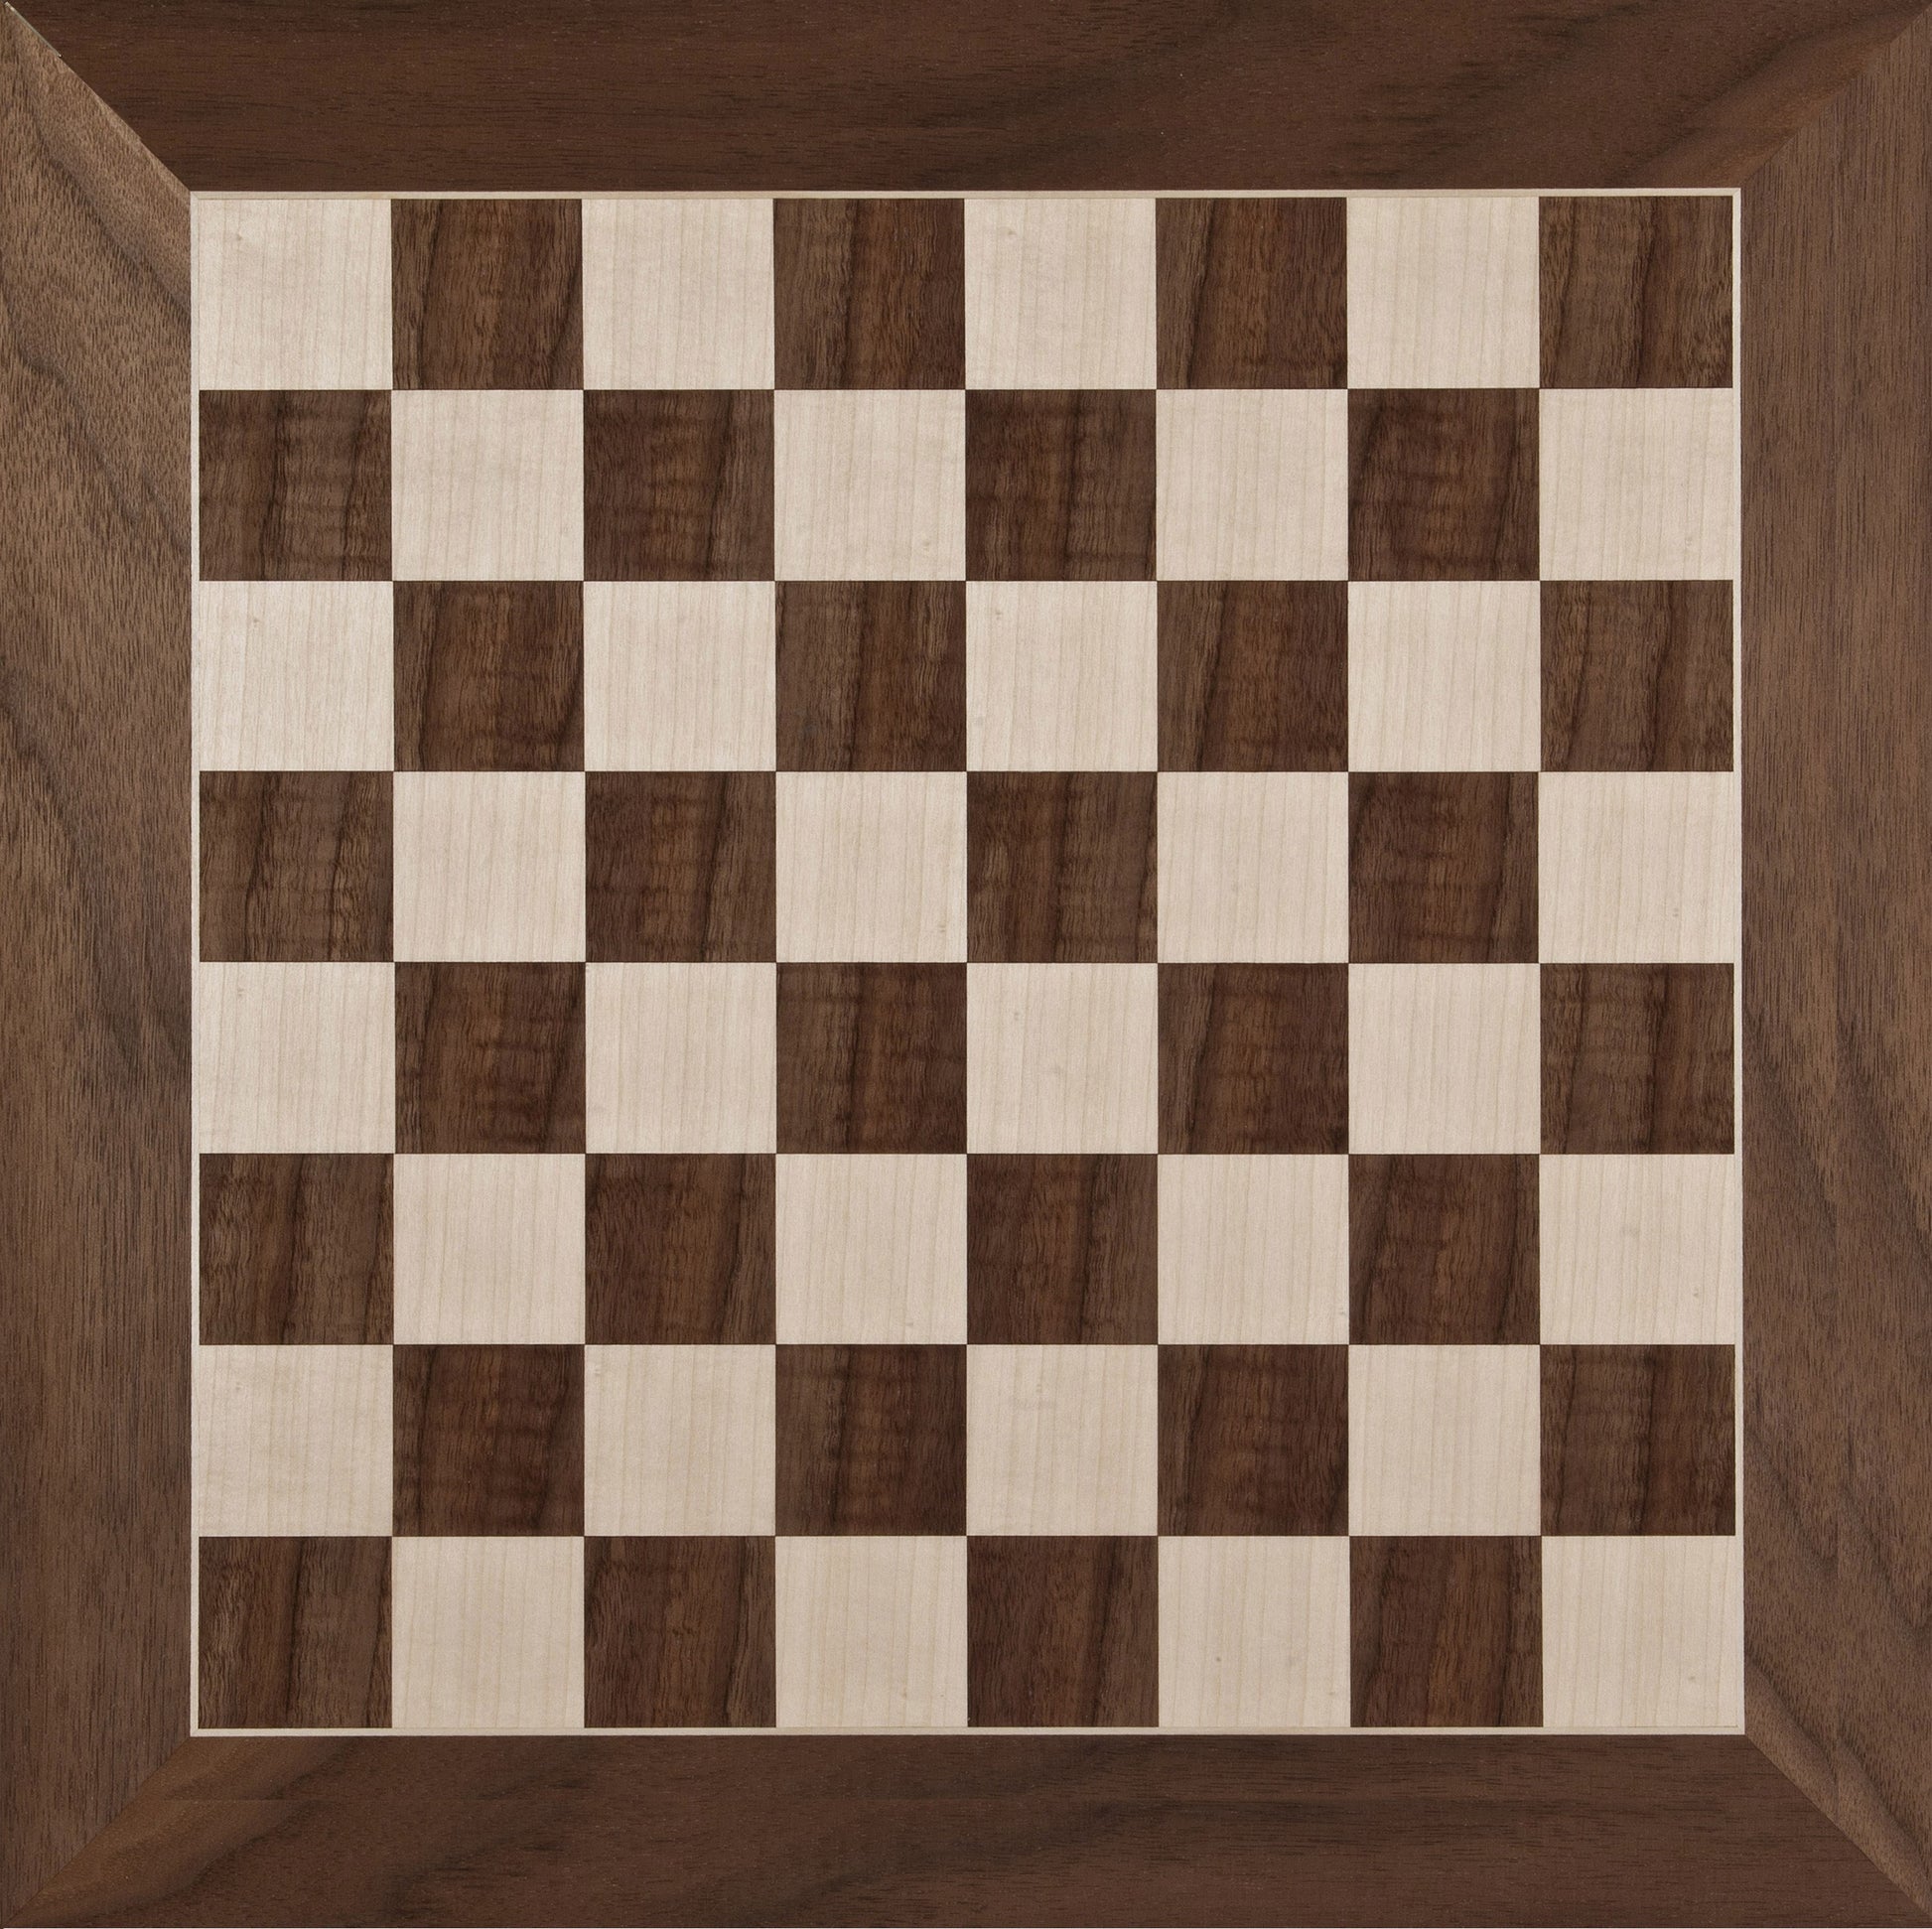 20 Inch Master Board from Spain (2 Inch Squares)